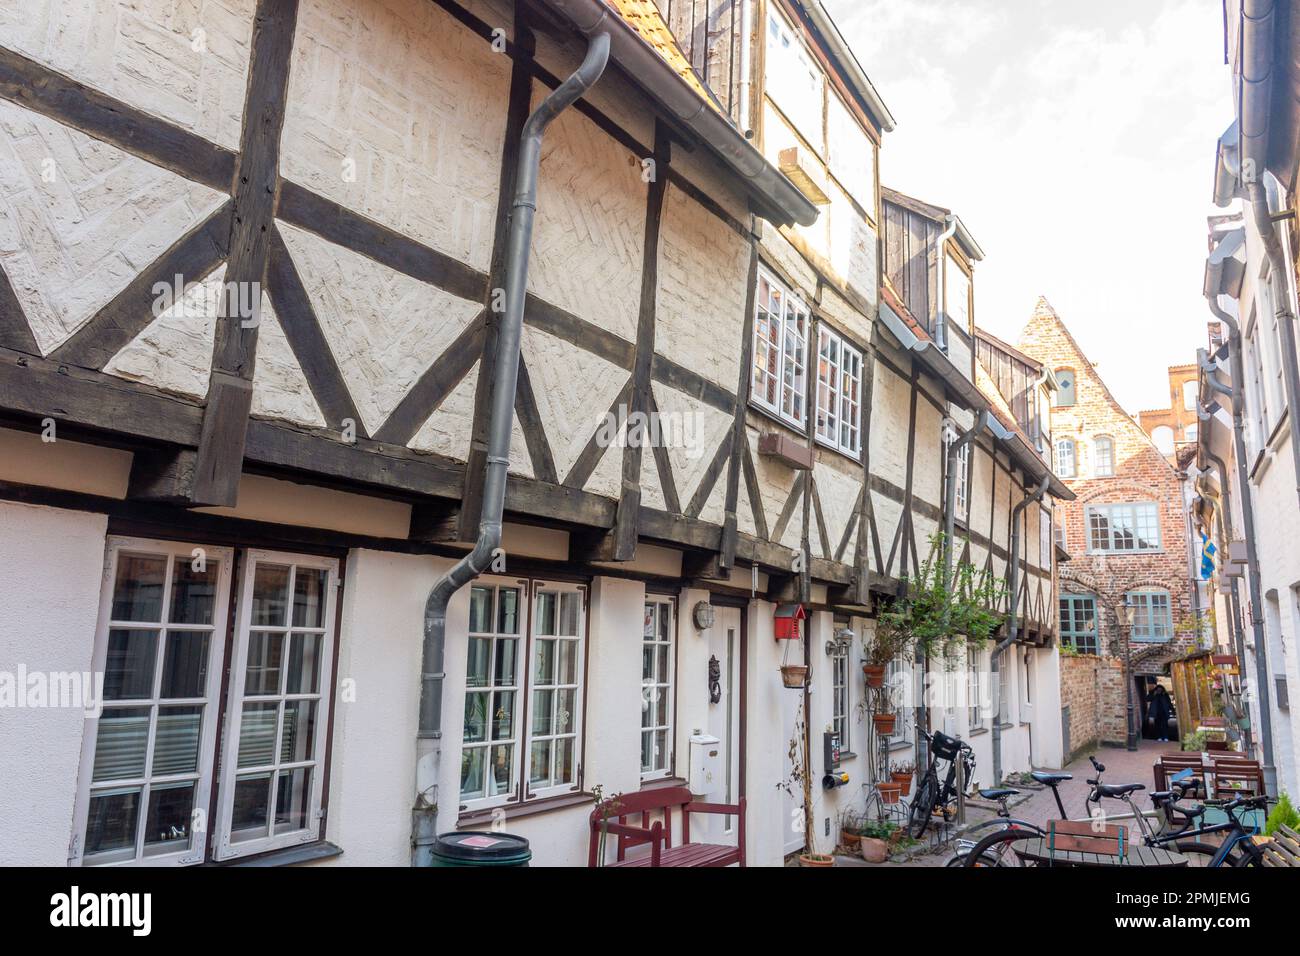 Timber-framed houses in Old Town, Lübeck, Schleswig-Holstein, Federal Republic of Germany Stock Photo